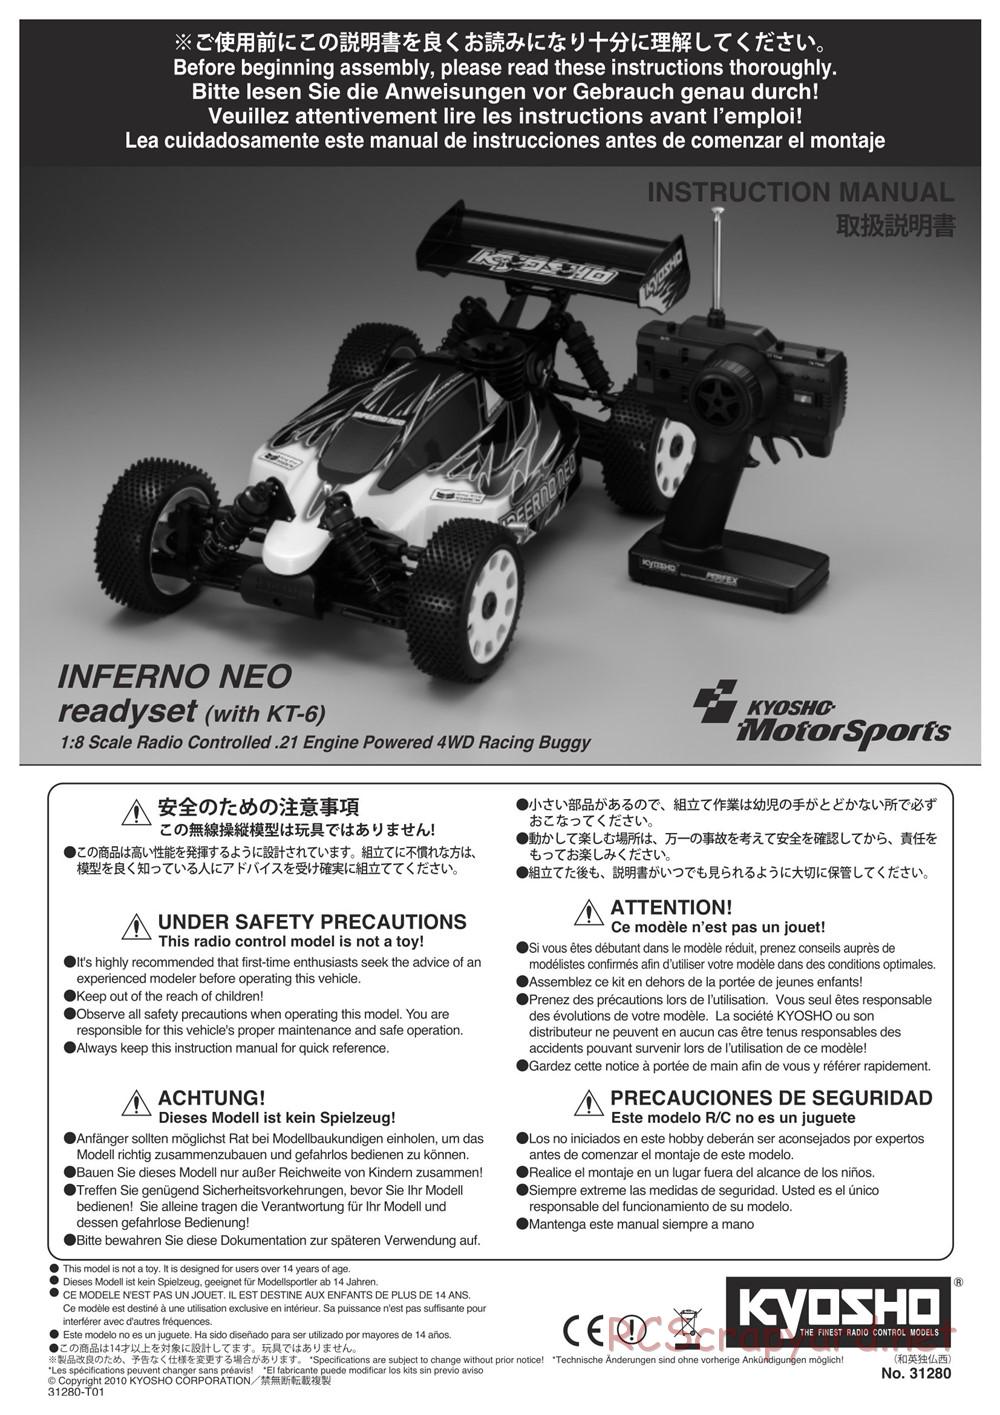 Kyosho - Inferno Neo - Manual - Page 1